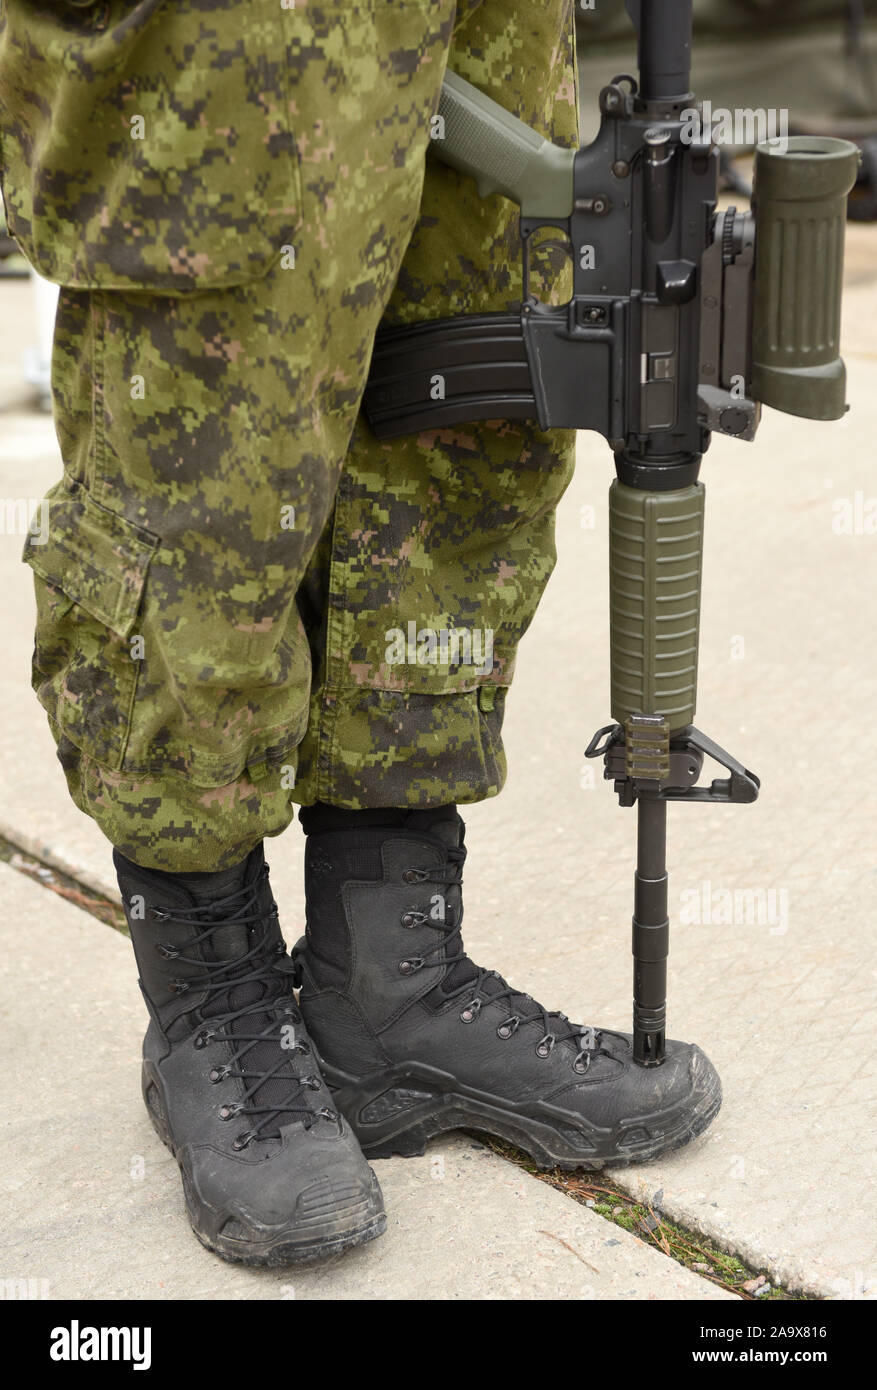 Soldier with weapon. Armistice. Armed forces, troops, army. Military concept. Stock Photo